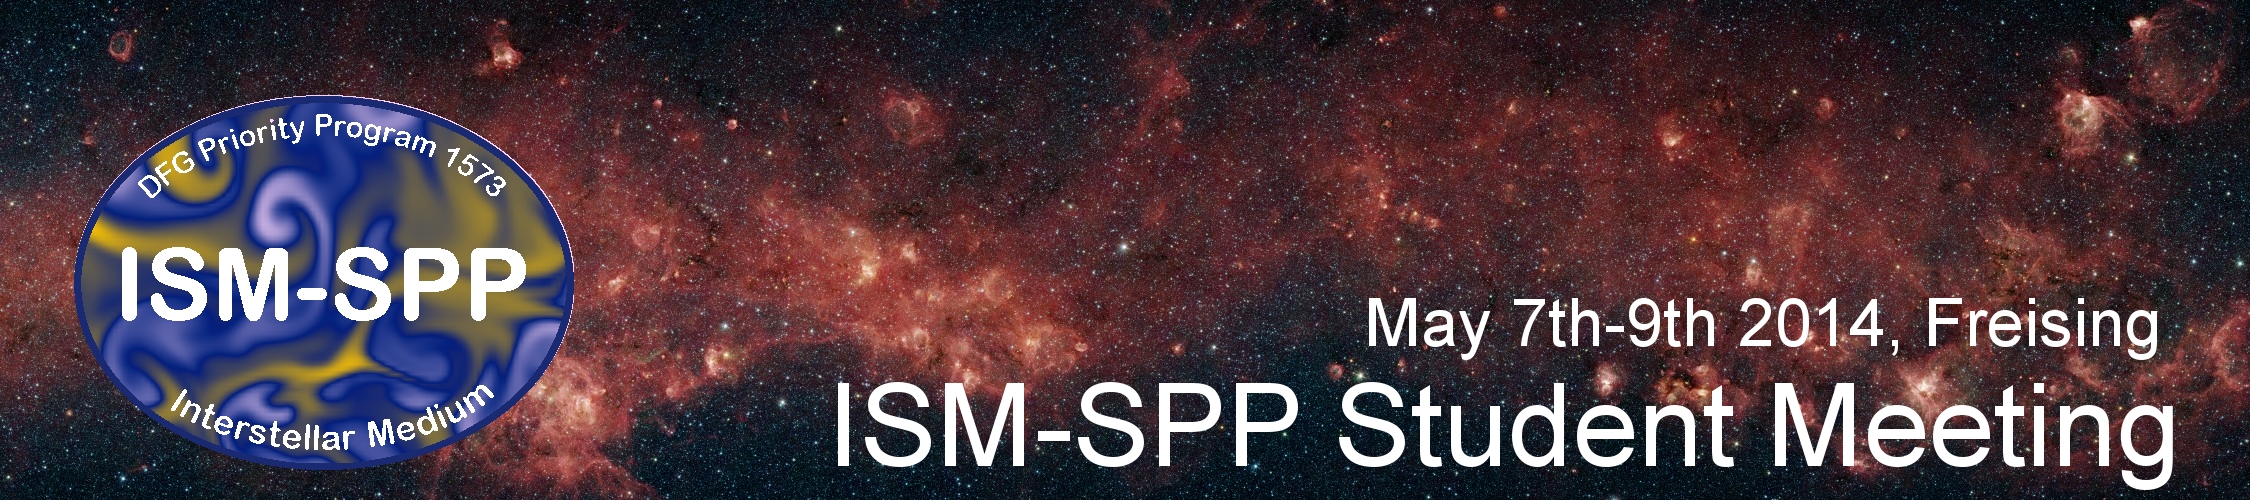 ISM-SPP Student Meeting